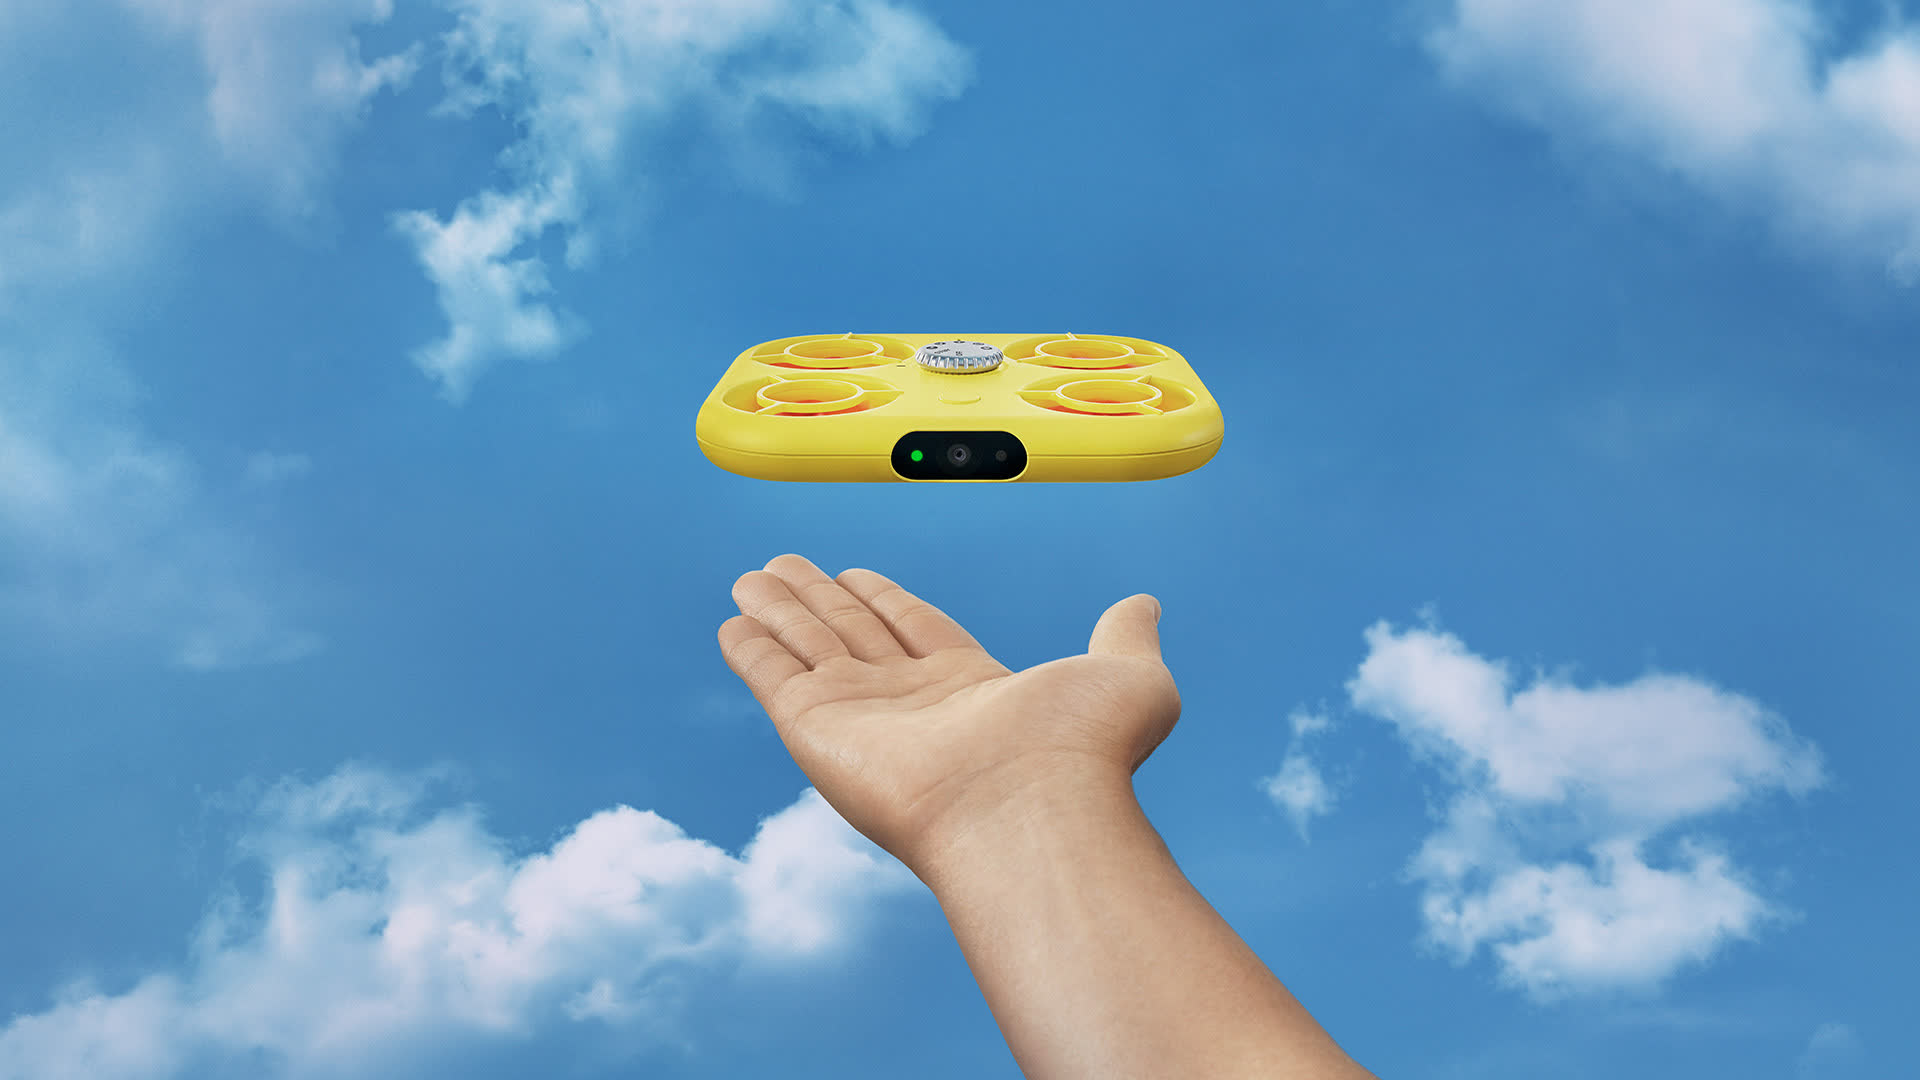 Pixy is the first drone to be created by Snap thumbnail